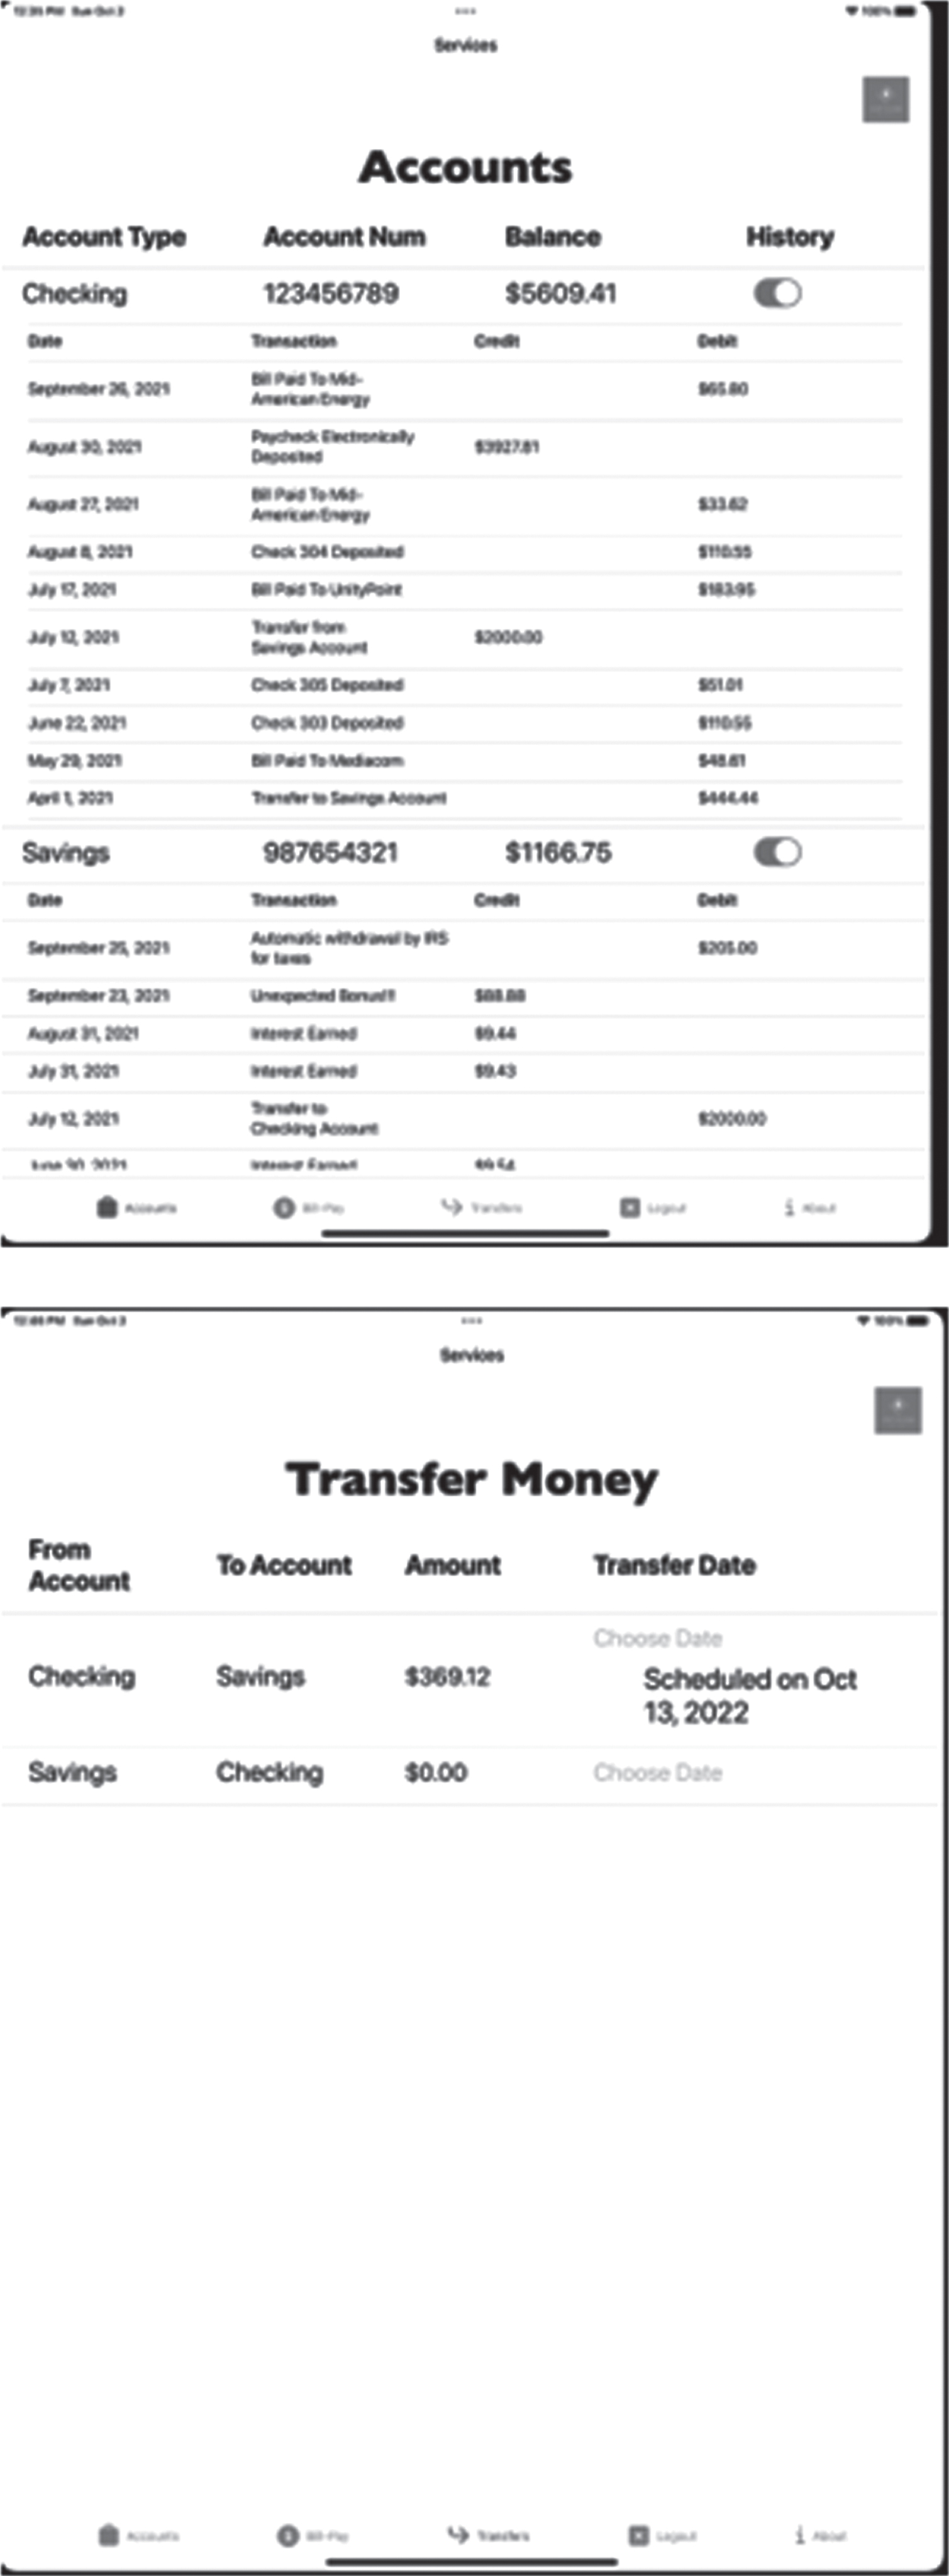 Top: Account Screen, showing the Checking and Savings accounts, with their list of transactions. Bottom: Transfer Screen, showing a scheduled transfer from the Checking to Savings account.